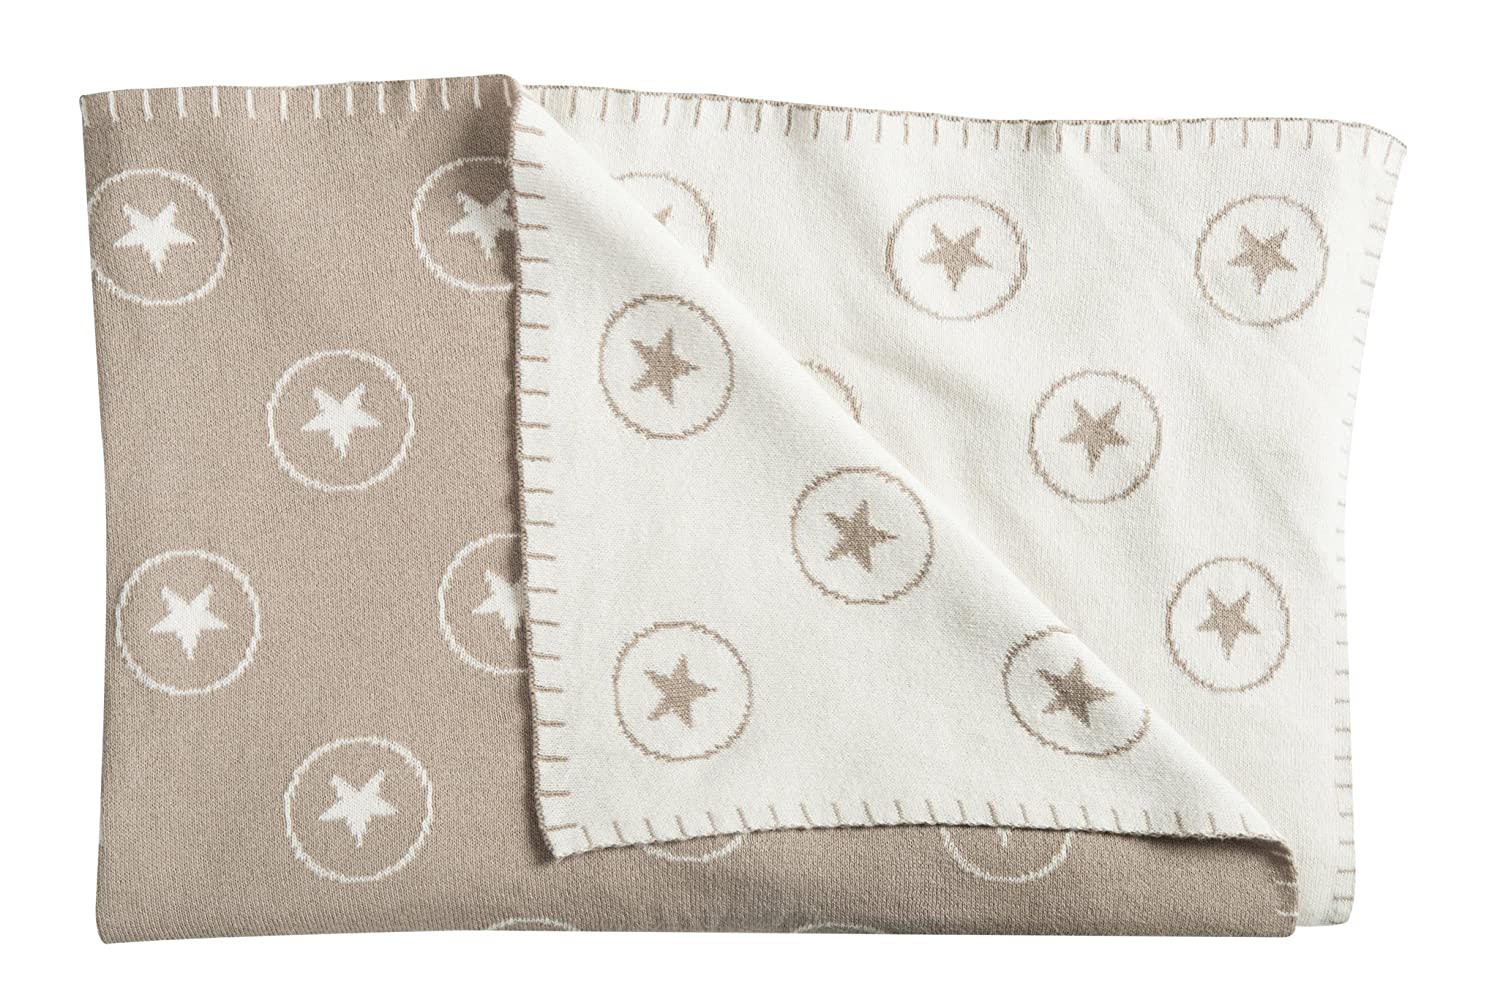 Schardt 15 00 – Wearable Blanket With Big Star  Circle Star